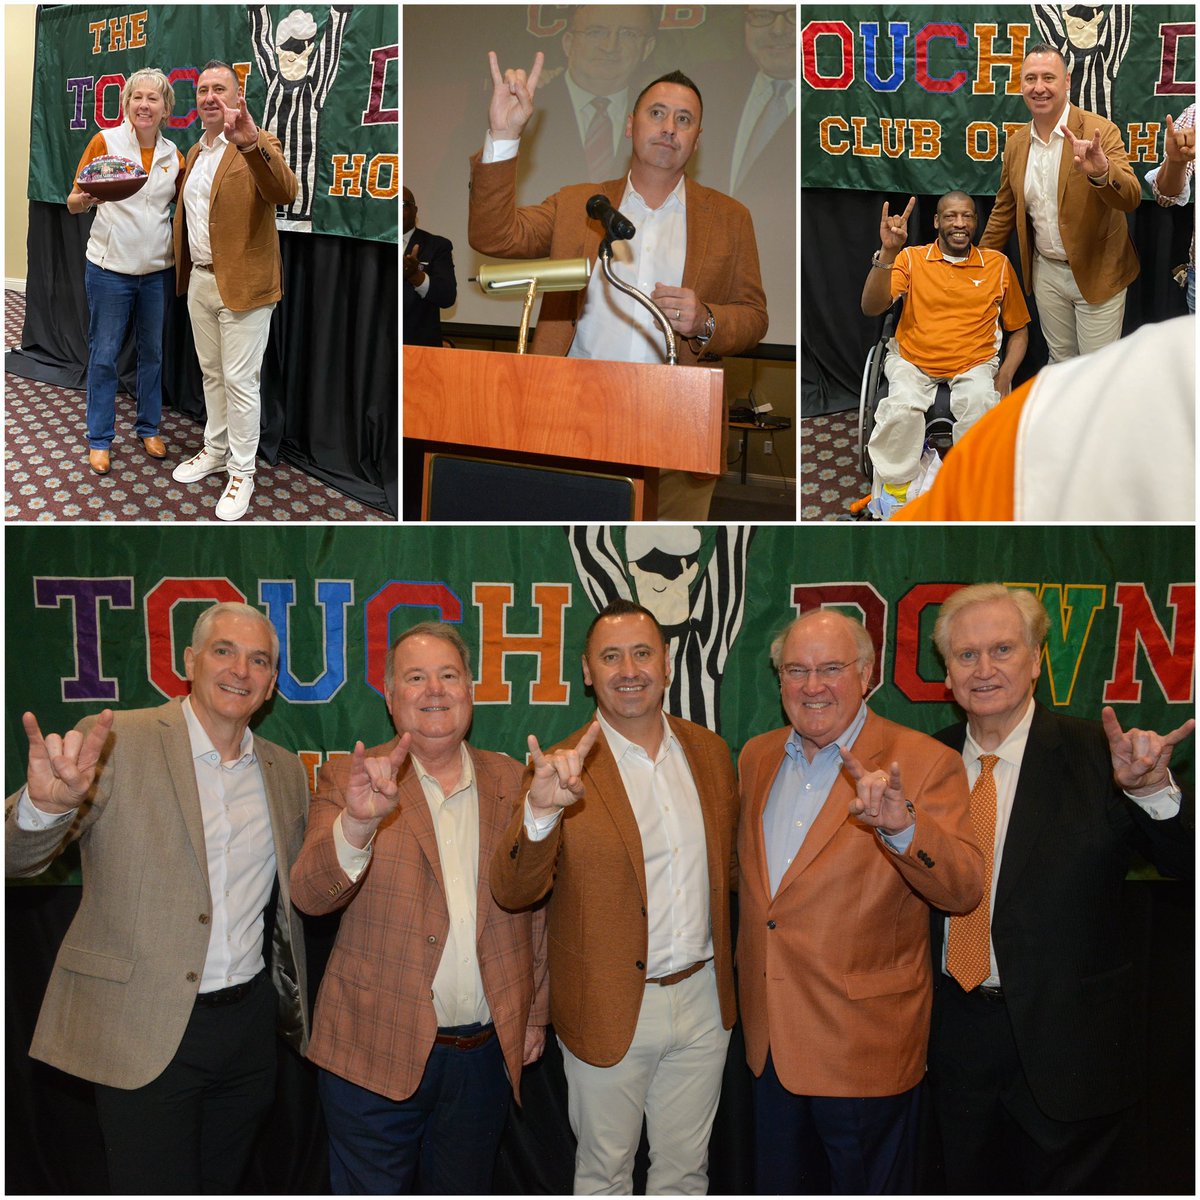 Always enjoy our @TexasFootball Day with @CoachSark at the @HoustonTDClub🤘🏻